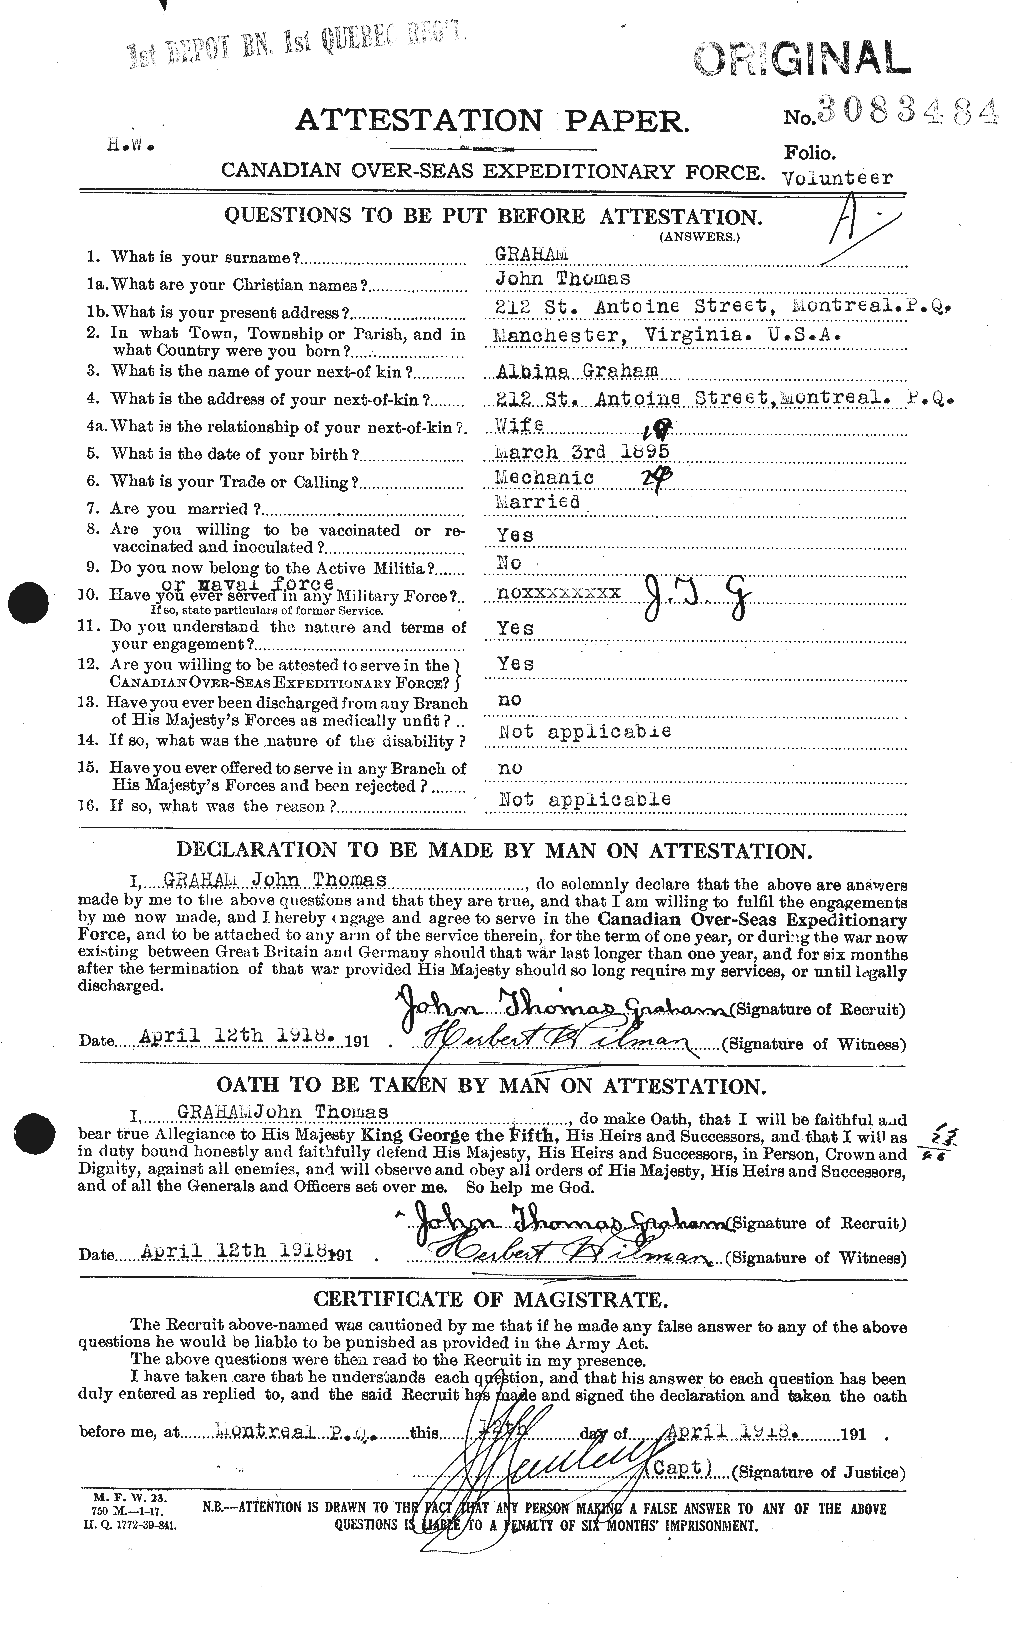 Personnel Records of the First World War - CEF 359212a